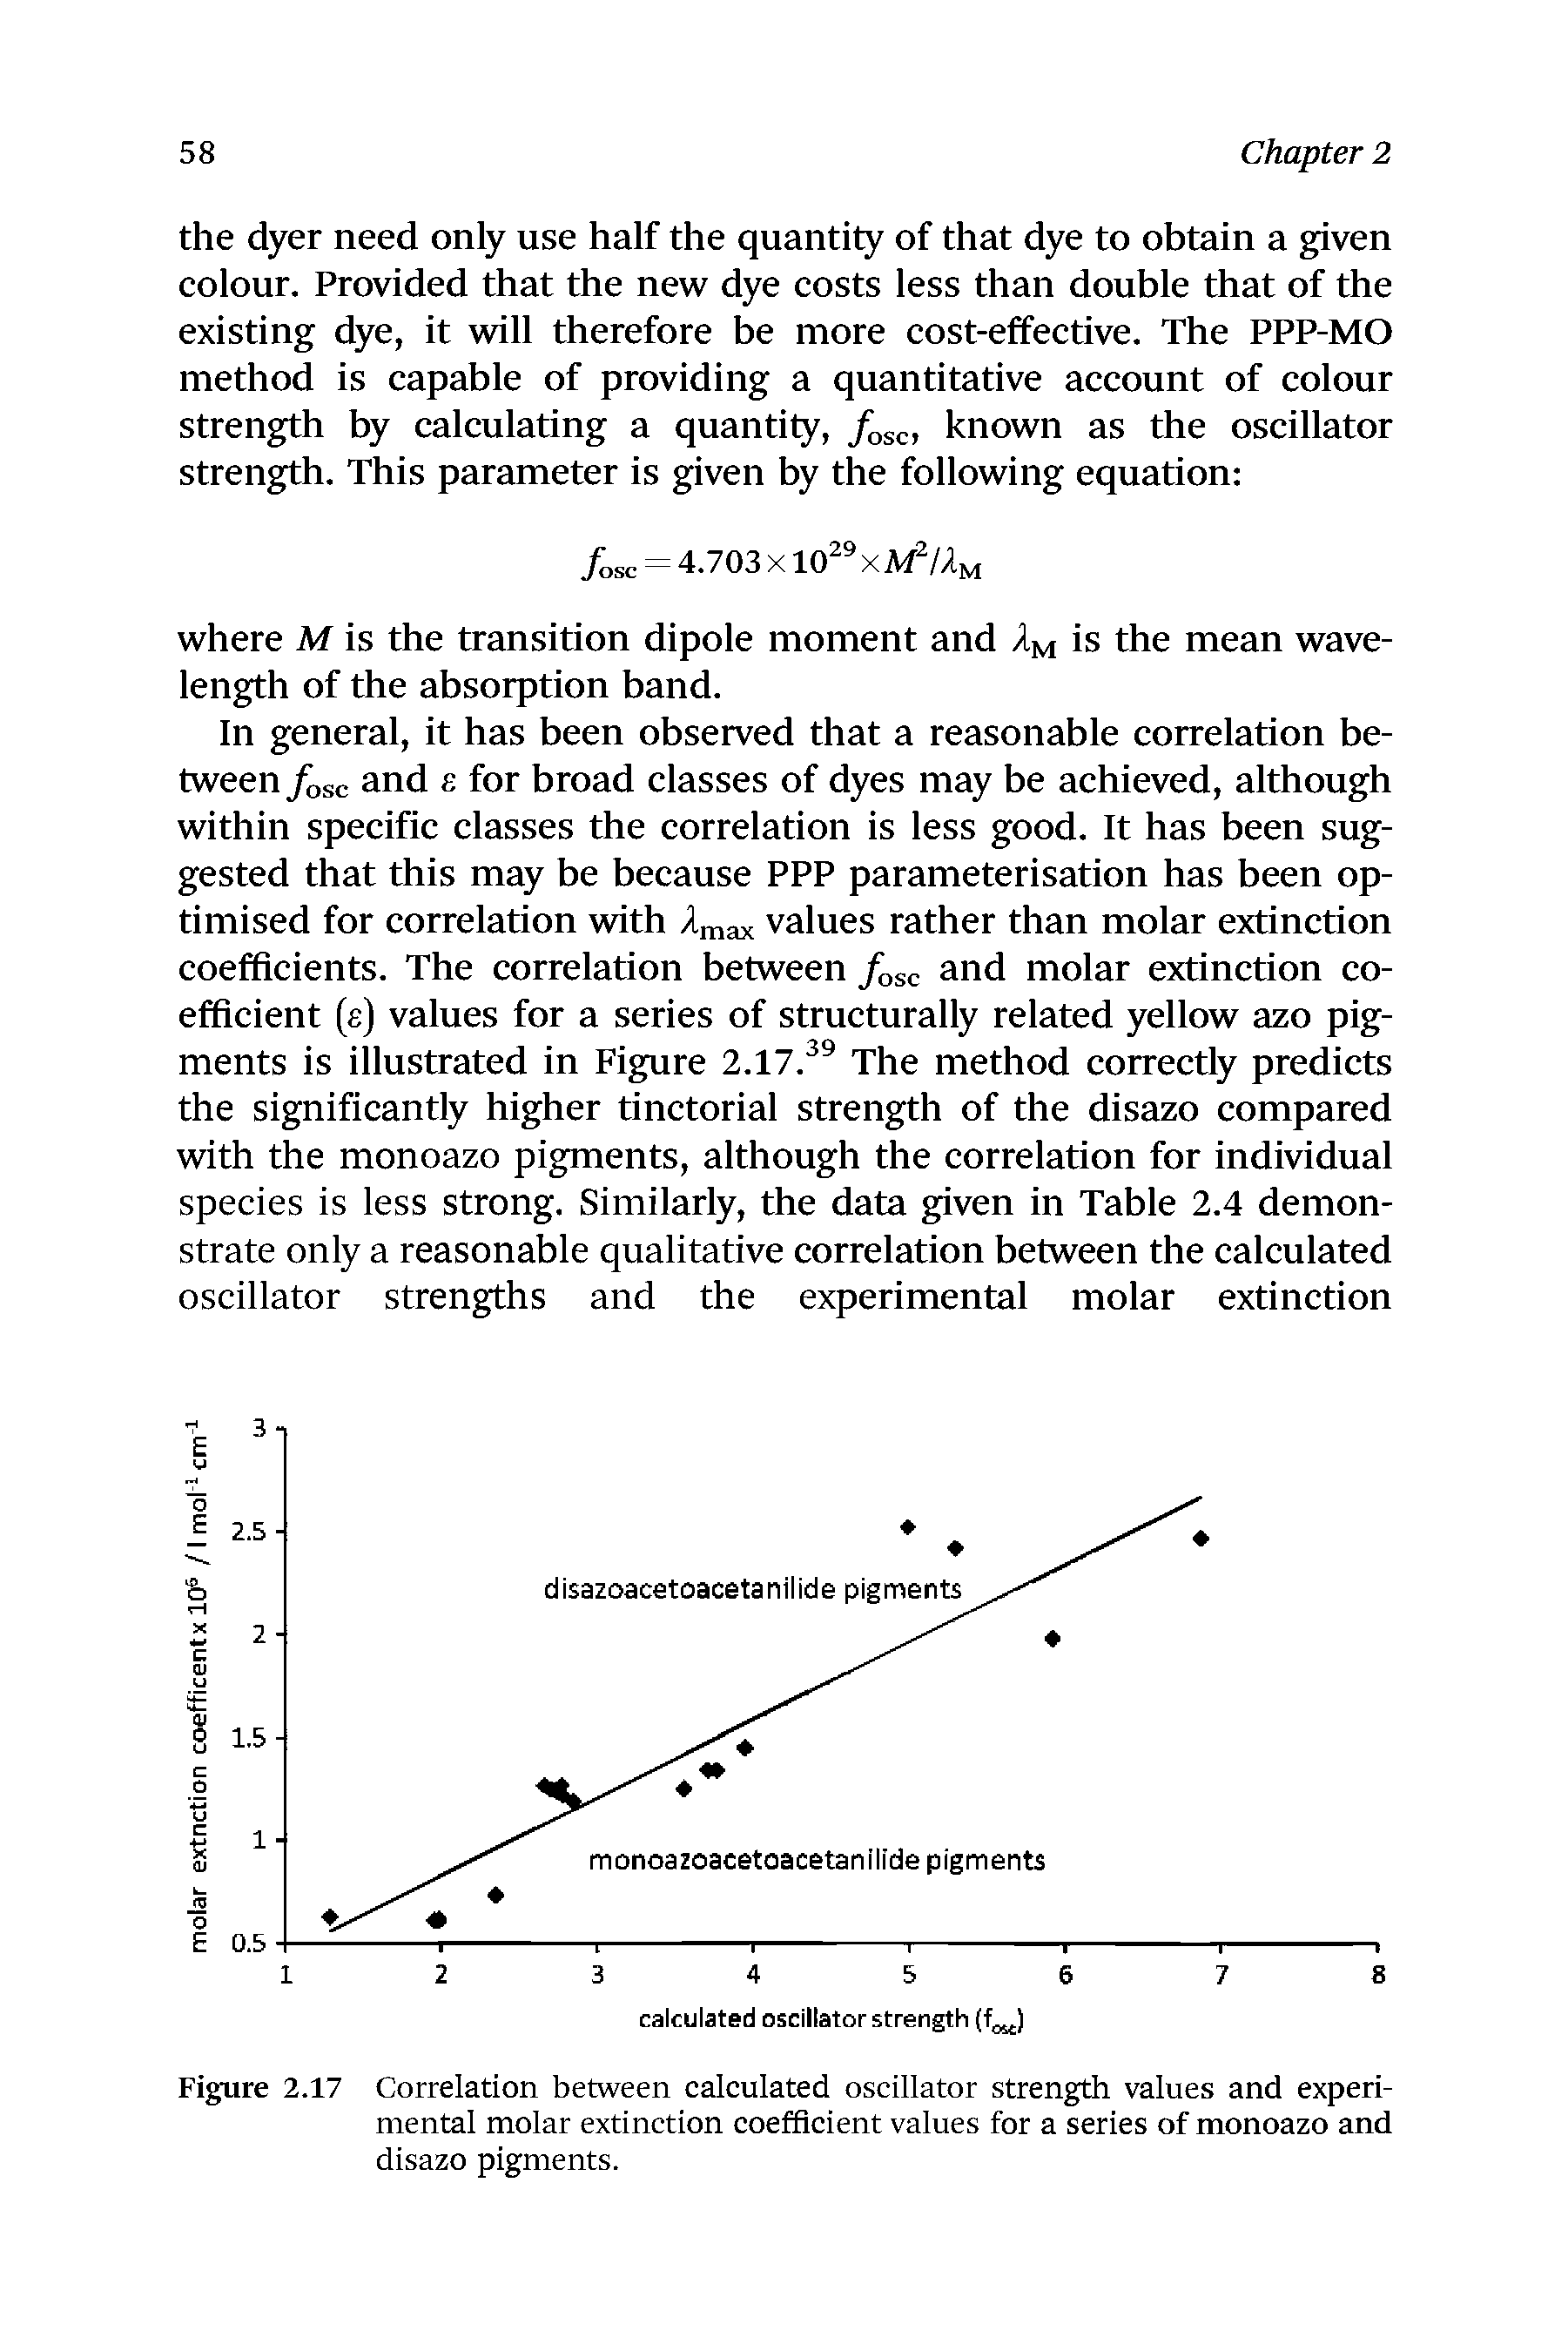 Figure 2.17 Correlation between calculated oscillator strength values and experimental molar extinction coefficient values for a series of monoazo and disazo pigments.